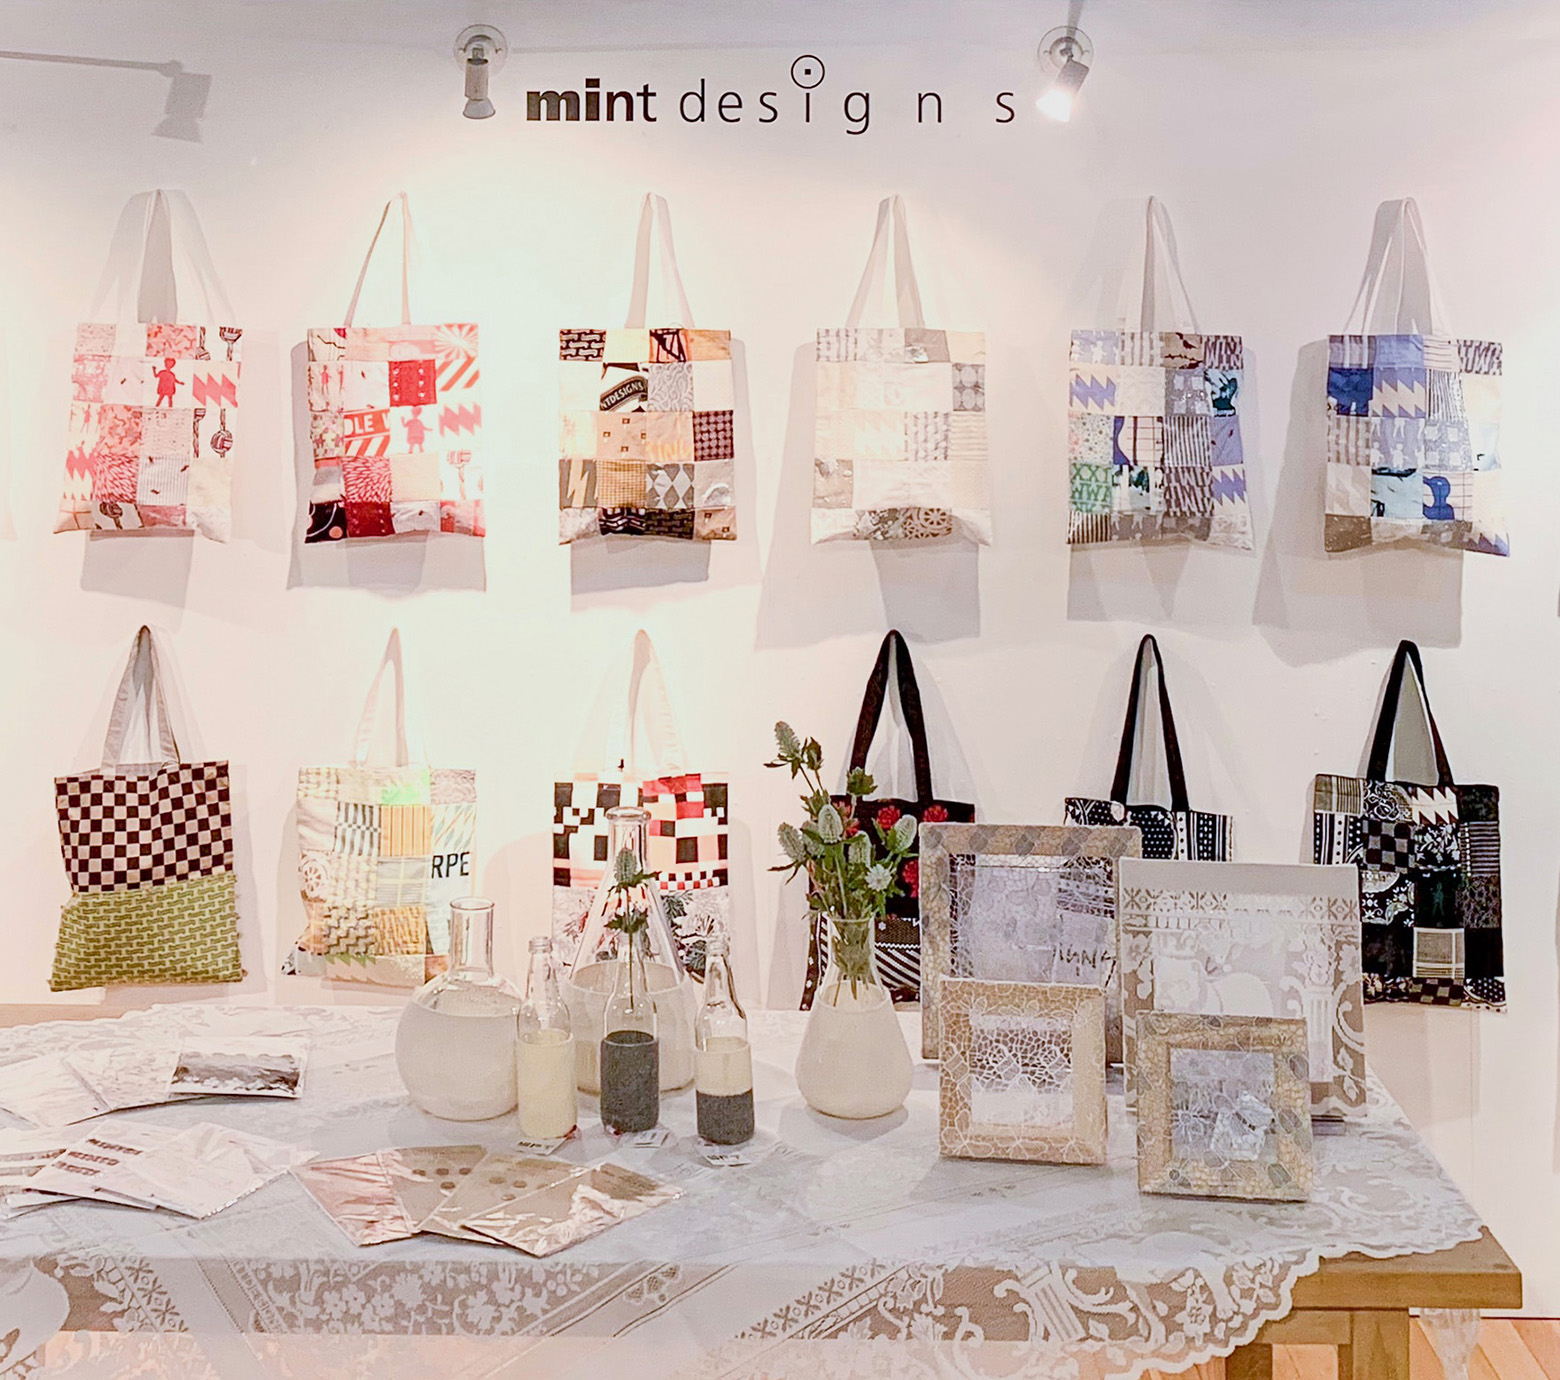 mintdesigns official web site.